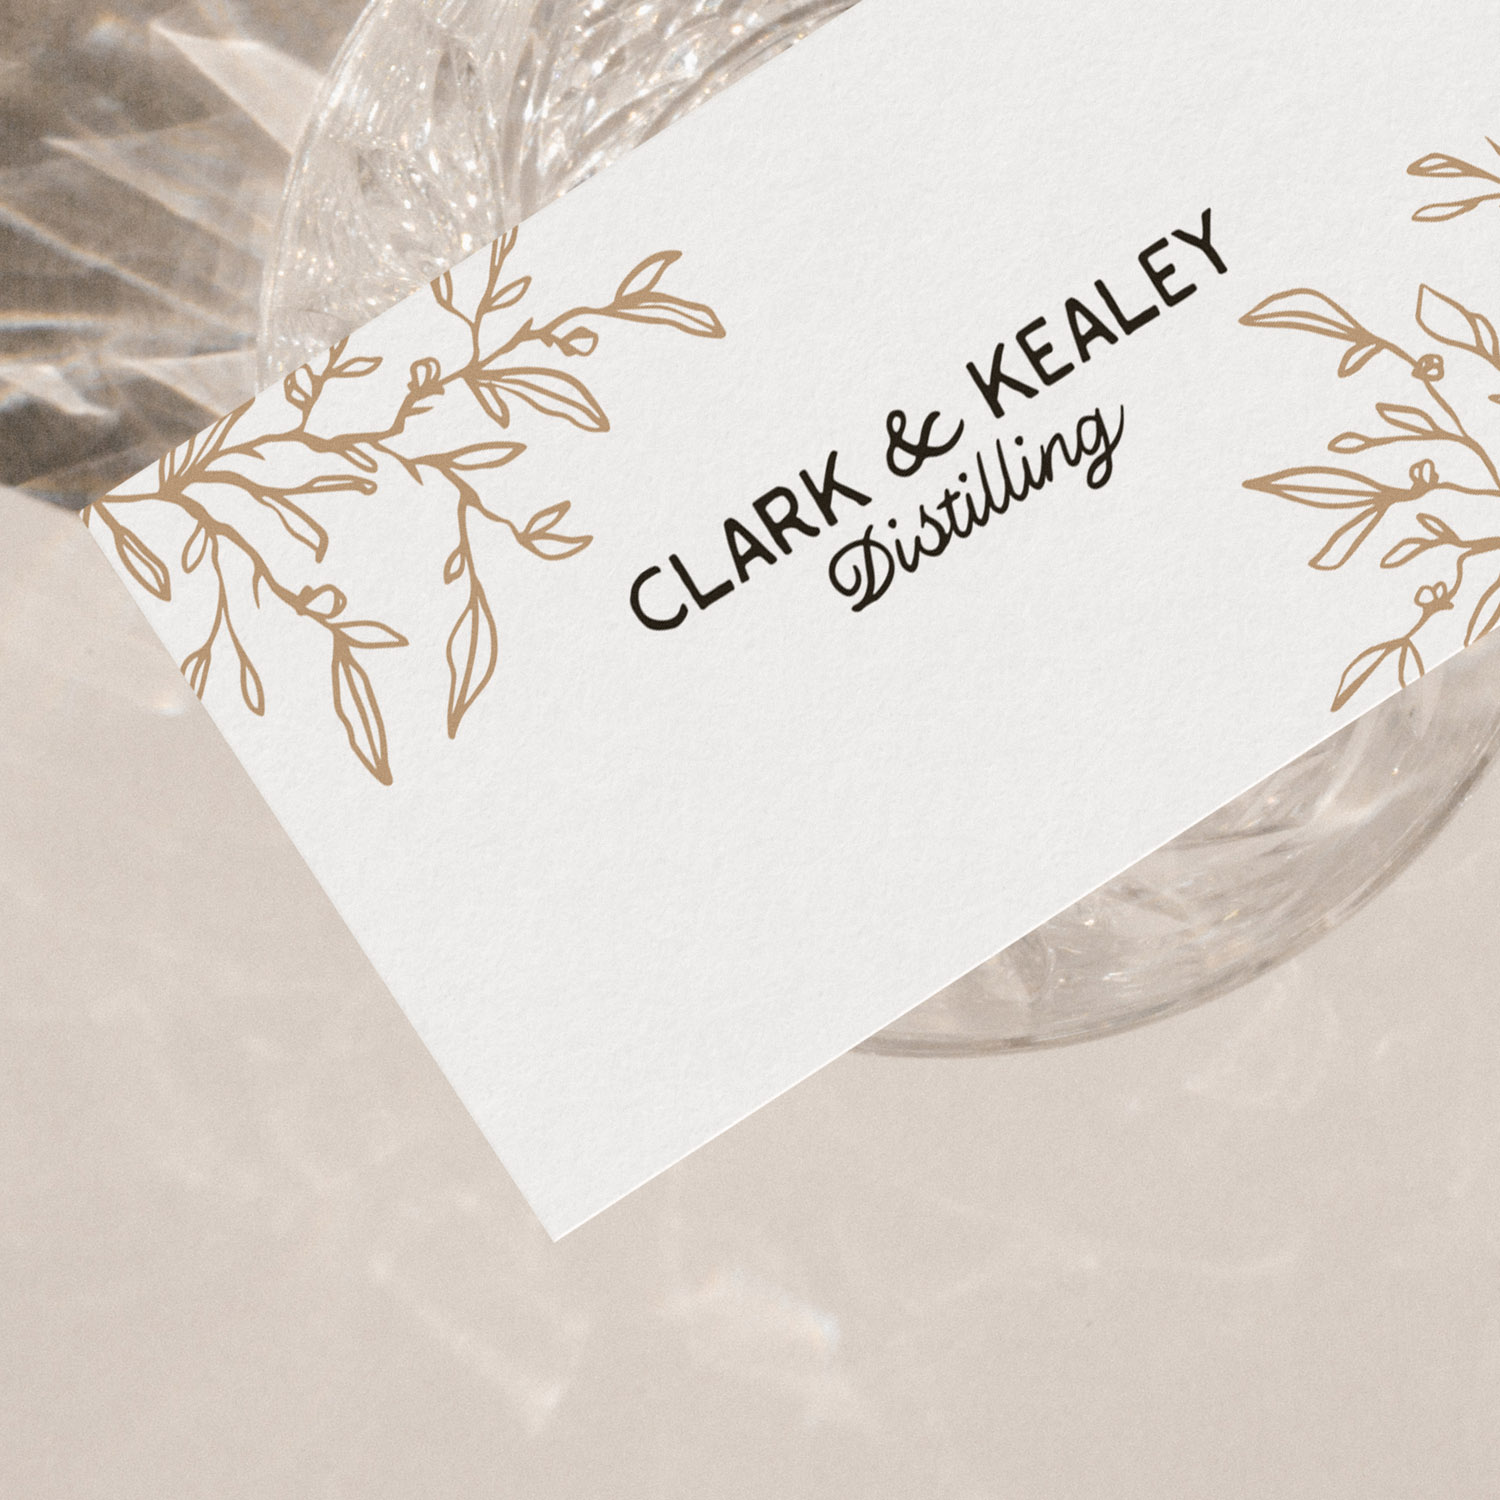 Clark and Kealey Distilling brand identity by Leysa Flores Design